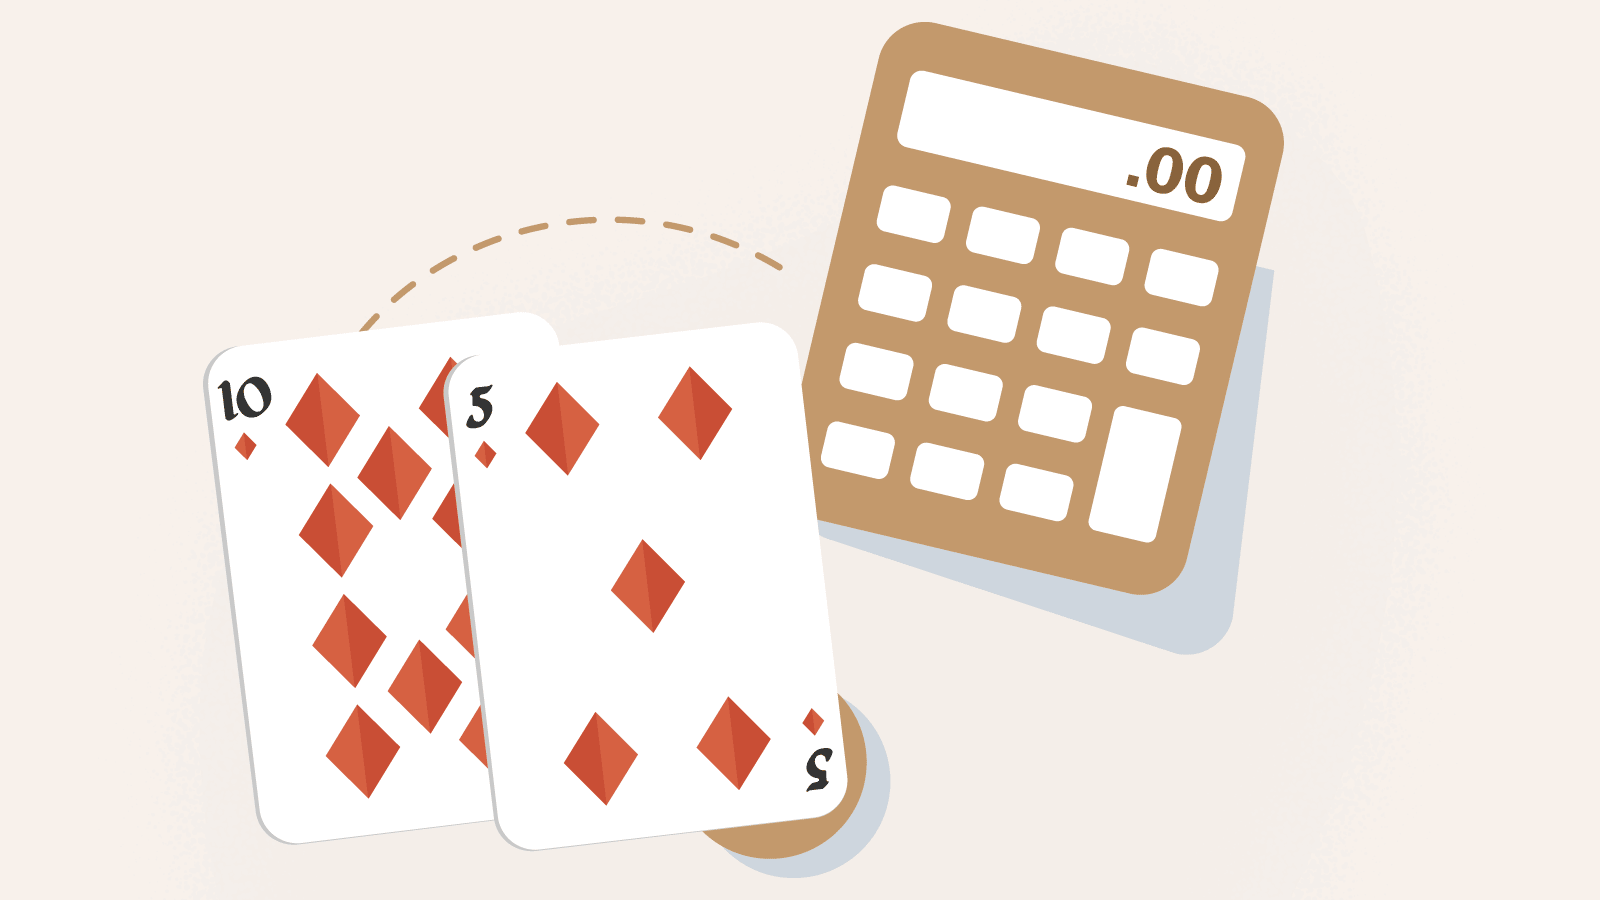 How to calculate 6 to 5 blackjack payouts